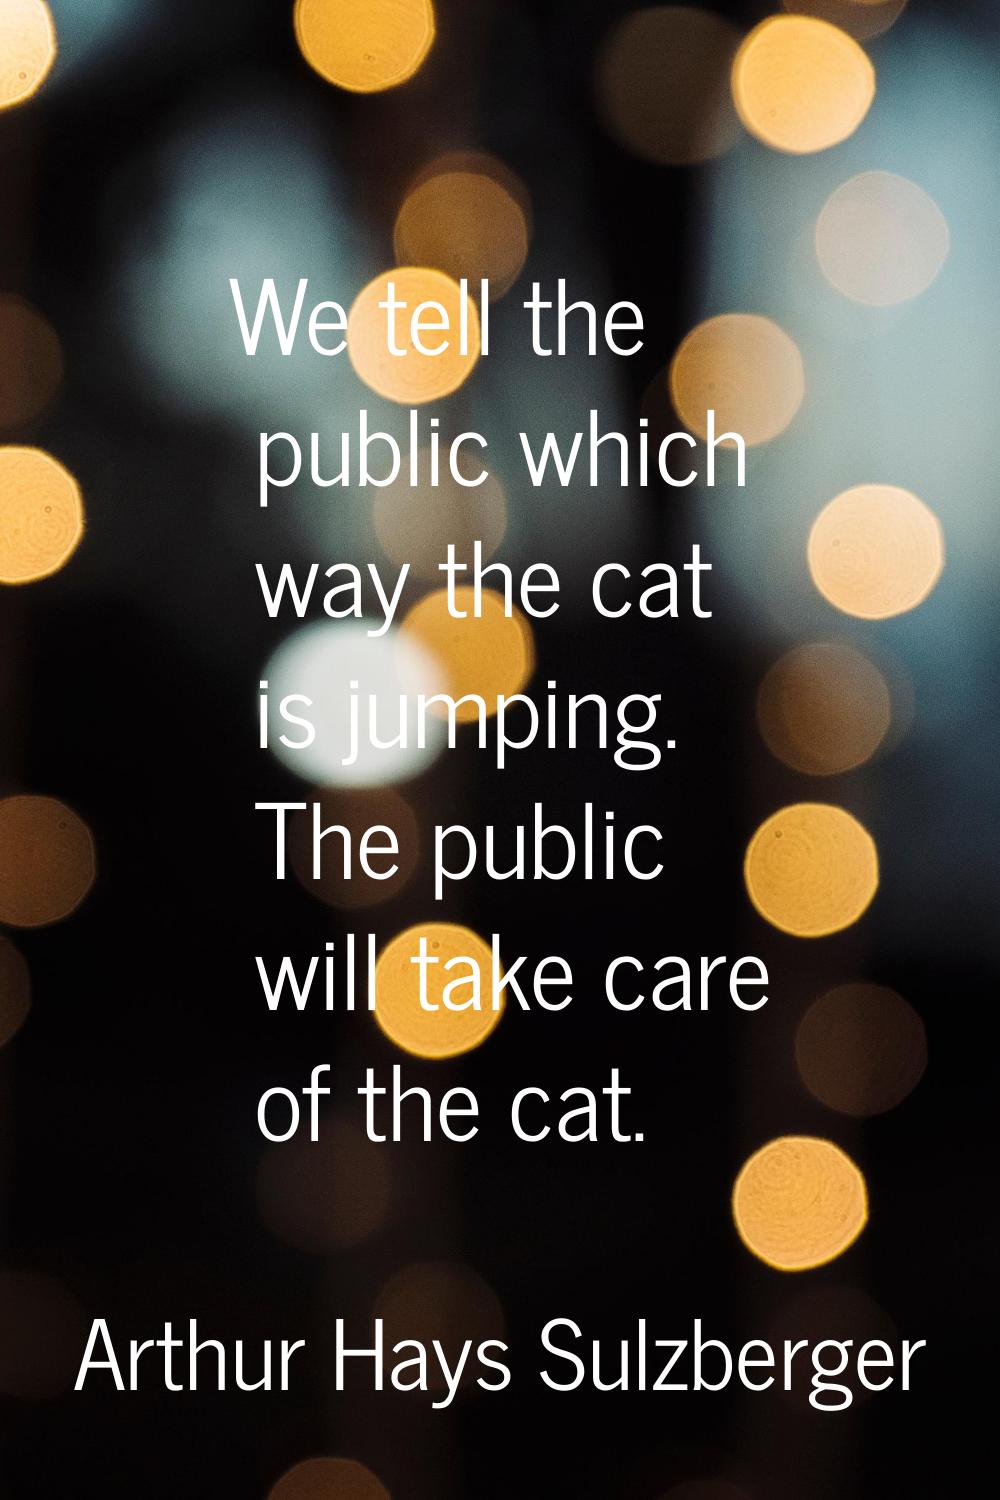 We tell the public which way the cat is jumping. The public will take care of the cat.